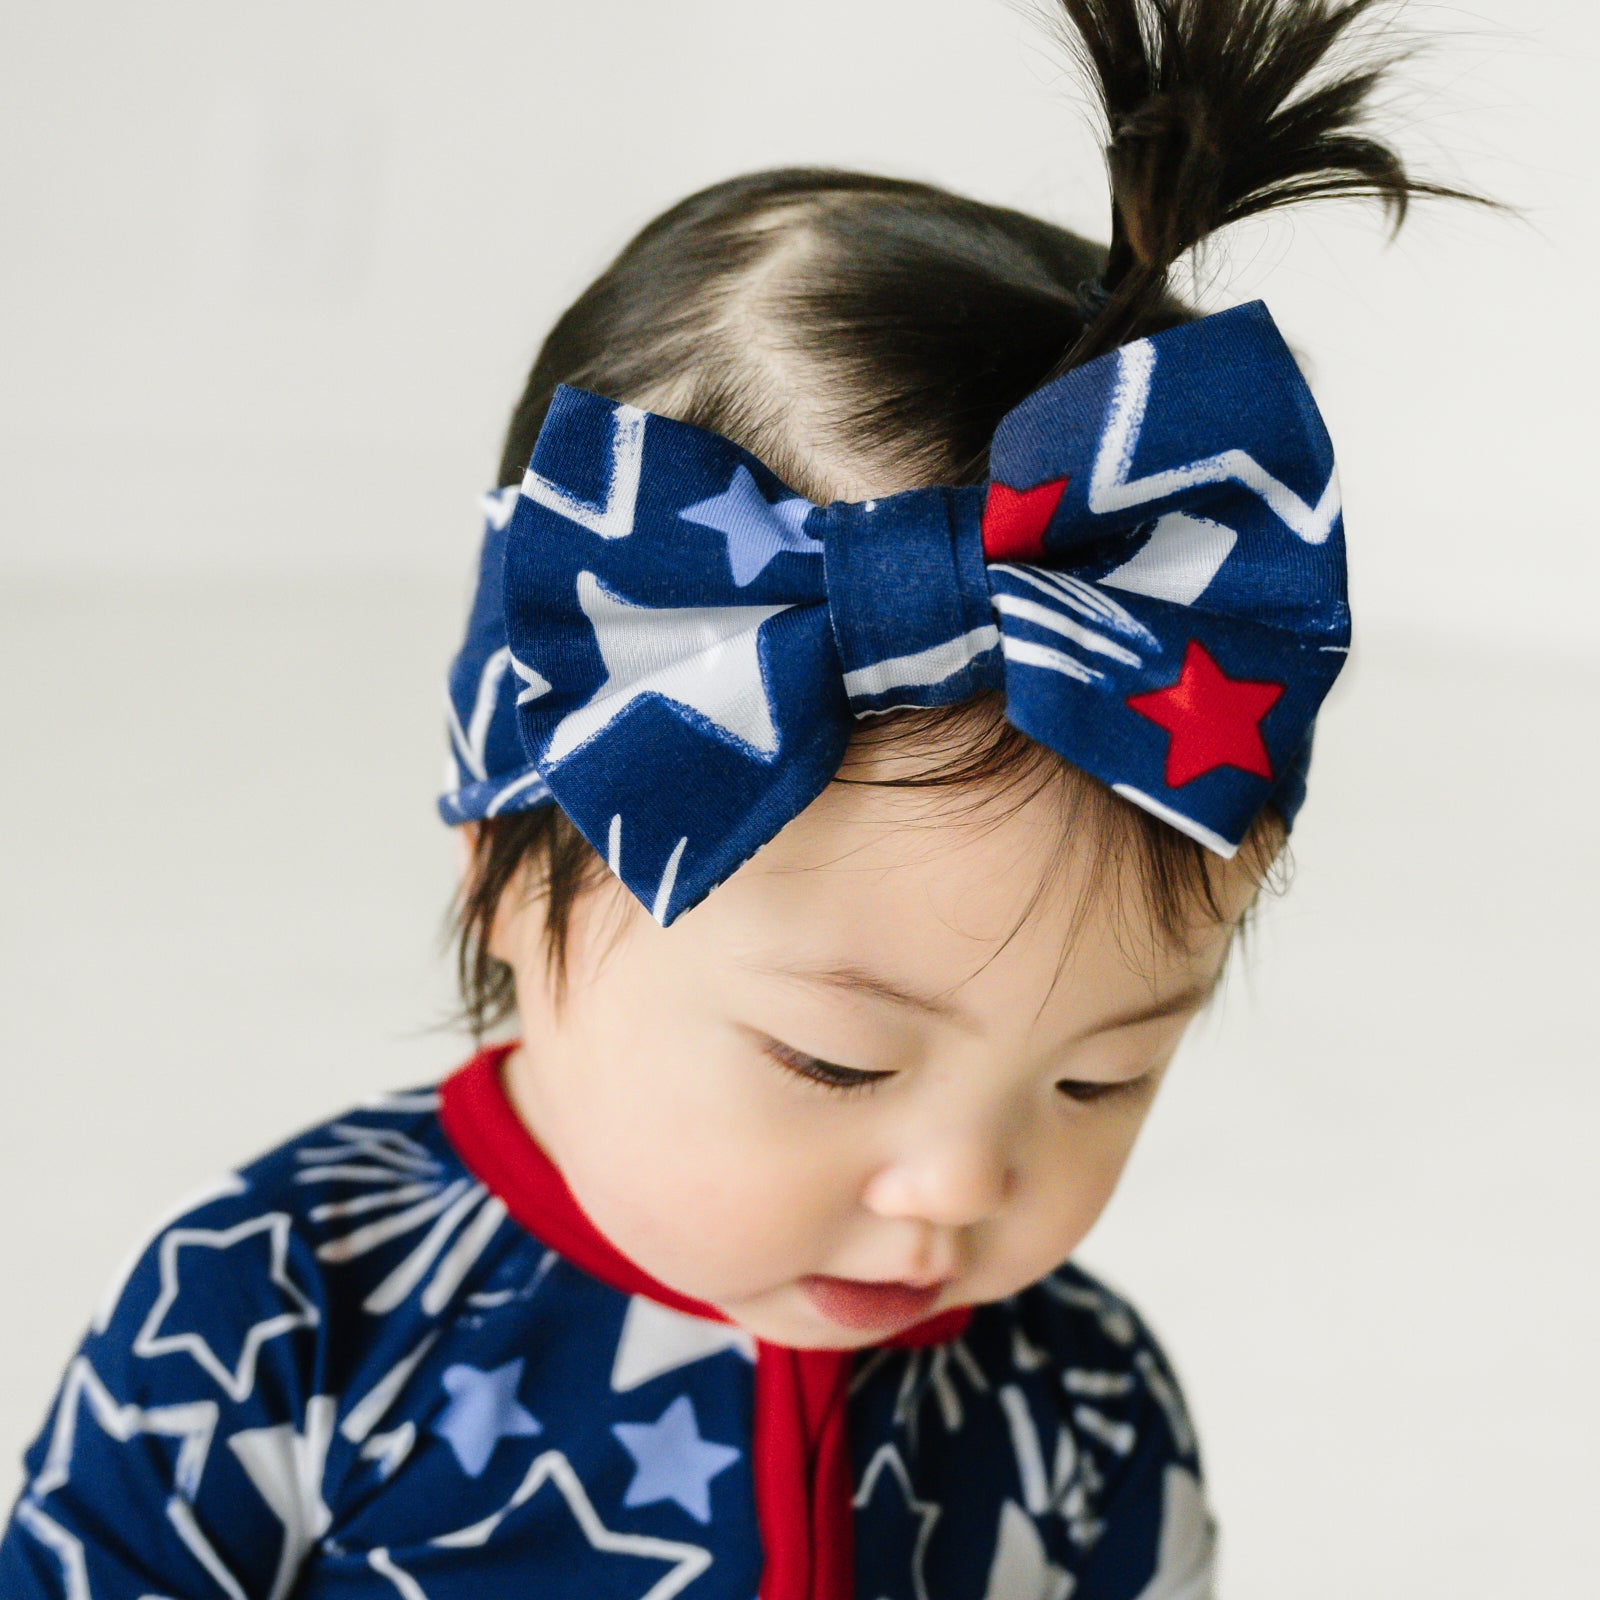 Close up image of a child wearing a Star Spangled luxe bow headband